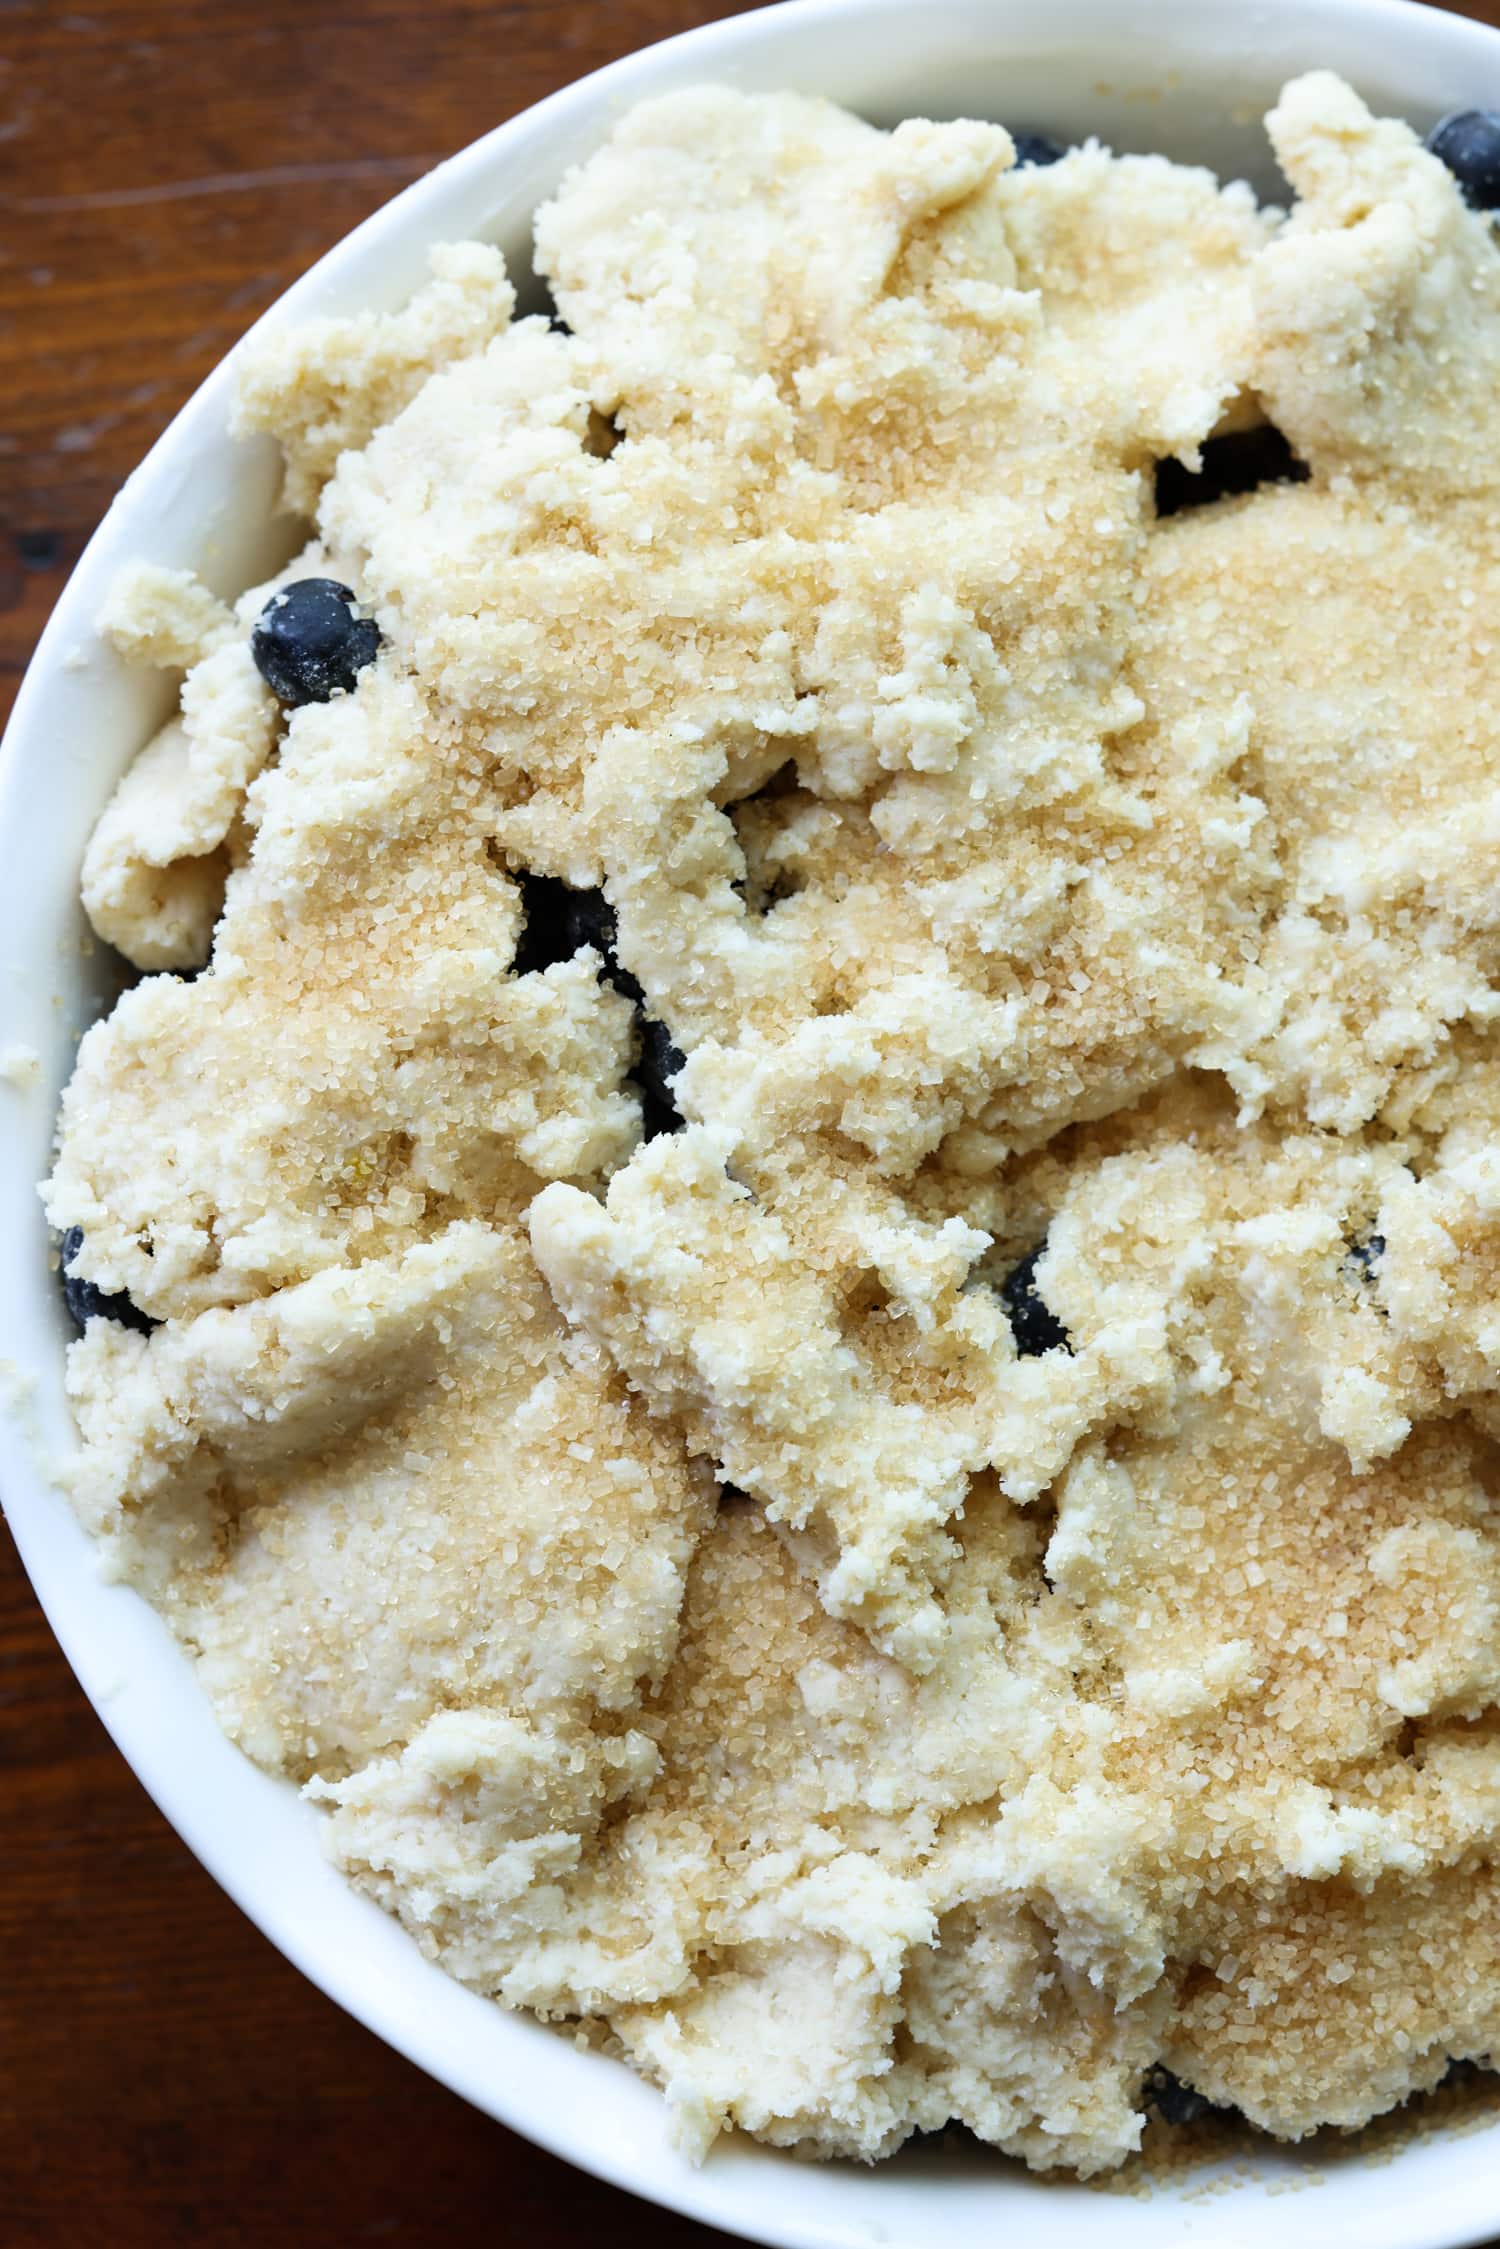 blueberries in a baking dish topped with sweet biscuit dough